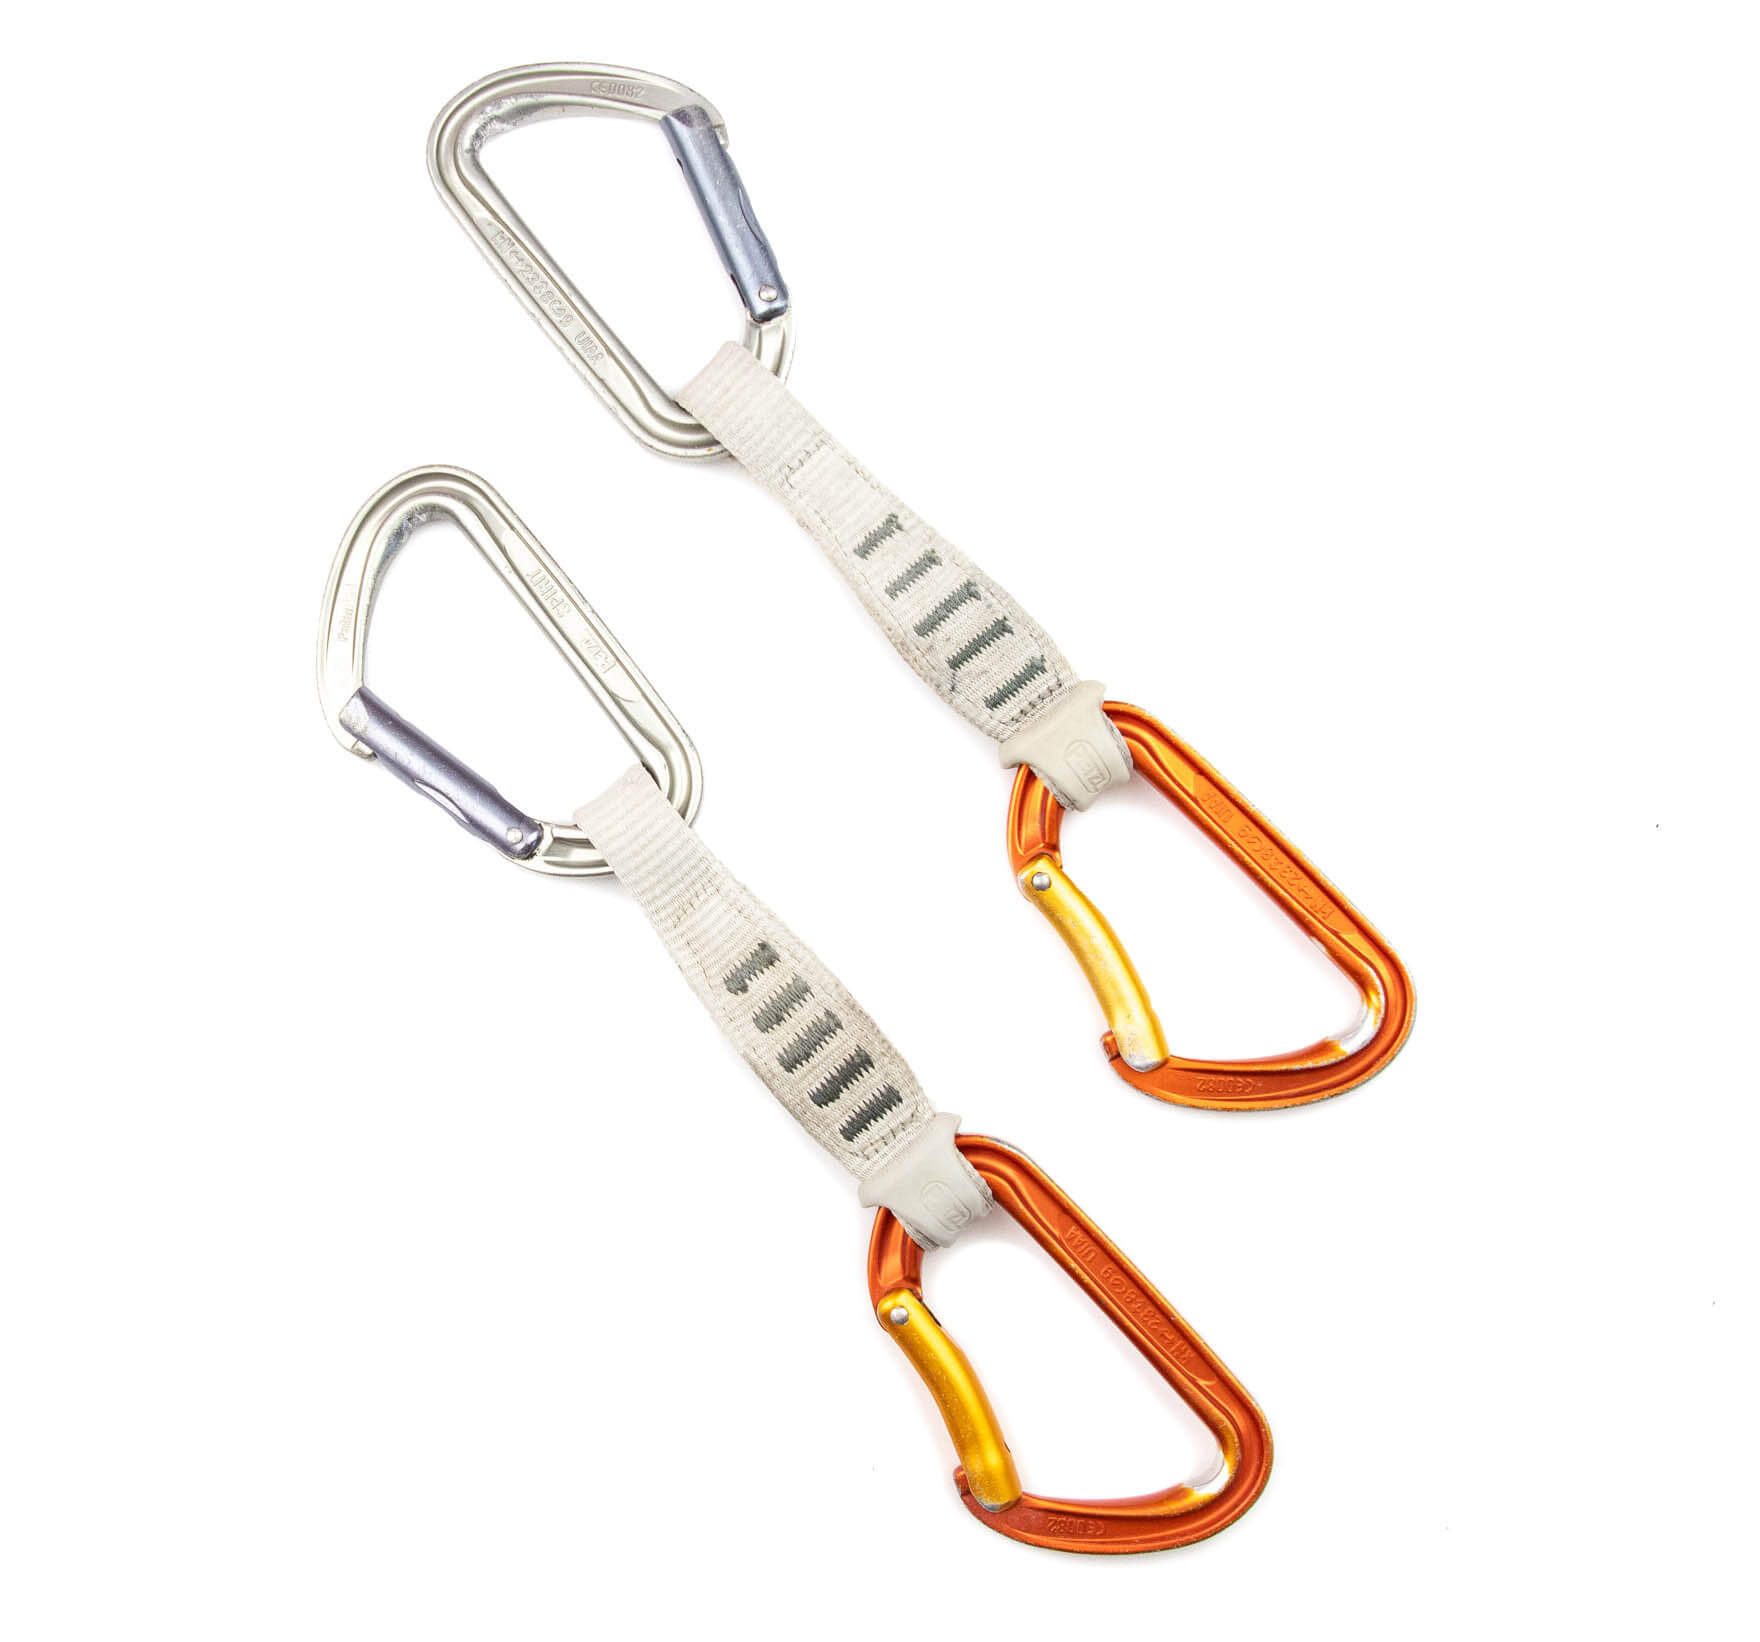 quicks with carabiners opposing and facing same way